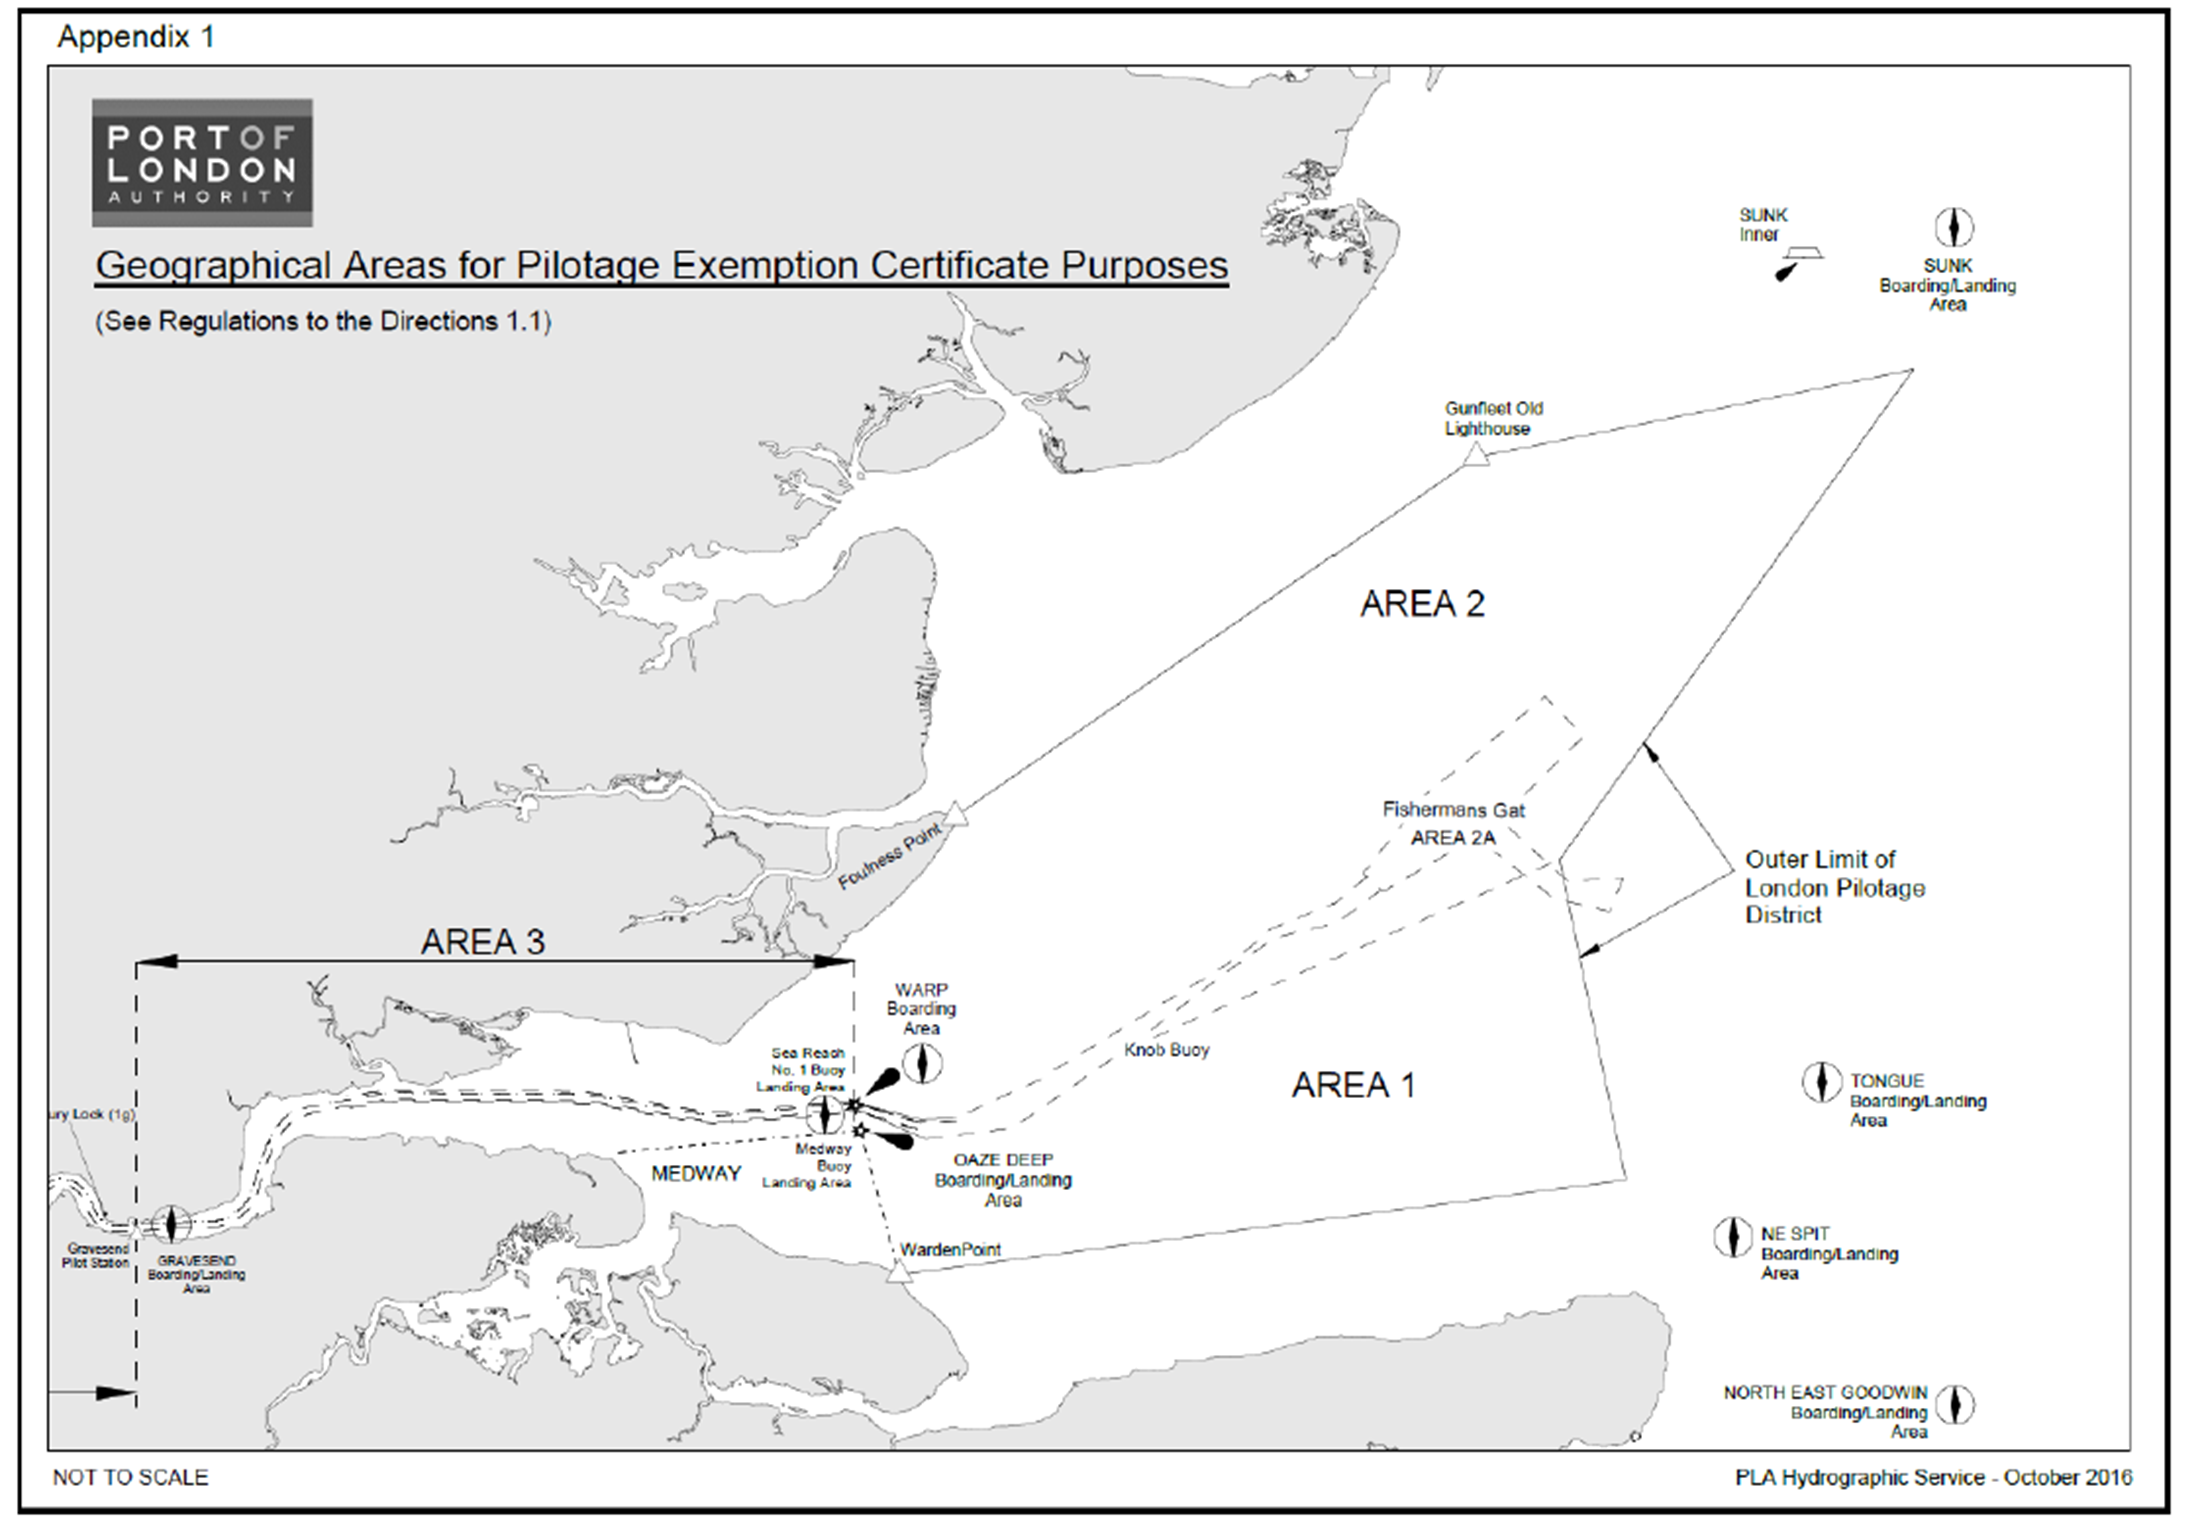 Map showing areas for pilotage exemption certificates purposes